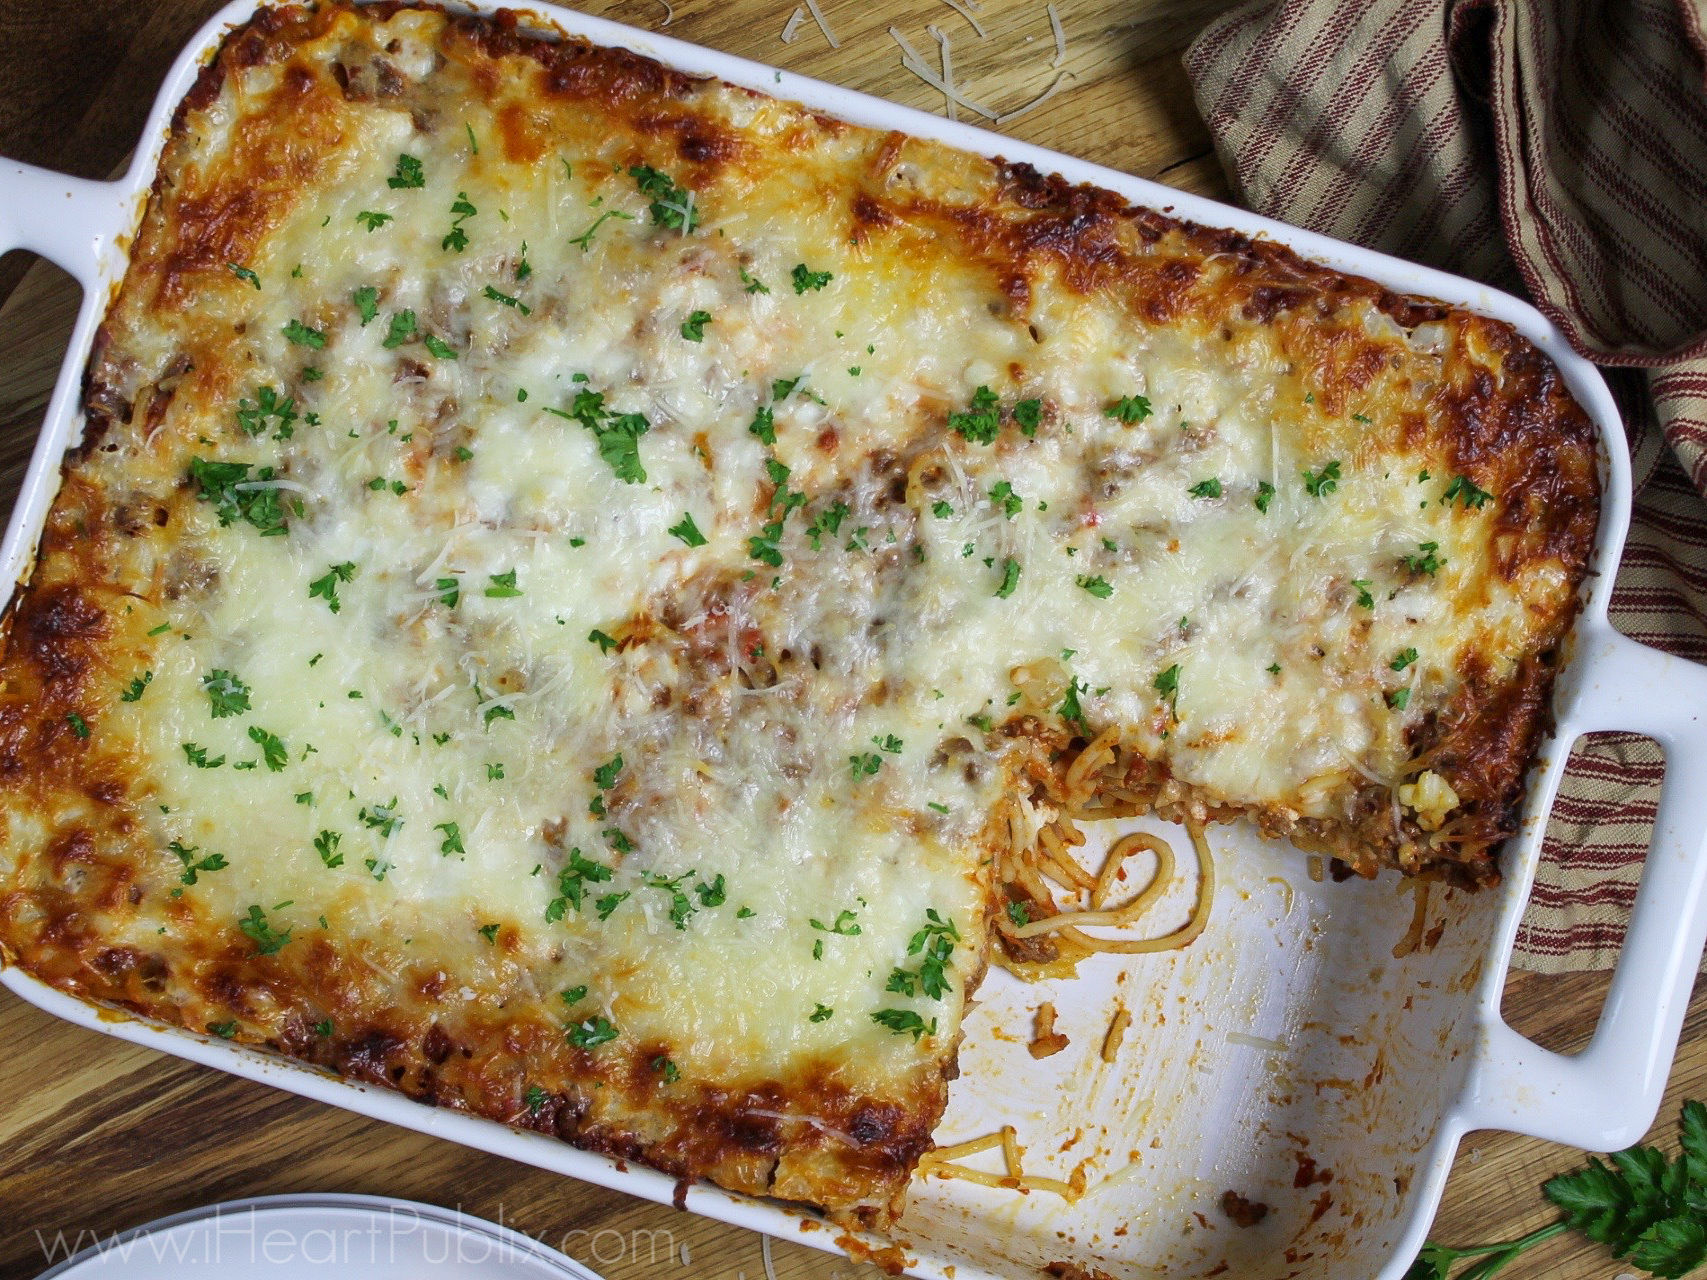 Baked Spaghetti - Super Meal To Go With The Sales At Publix on I Heart Publix